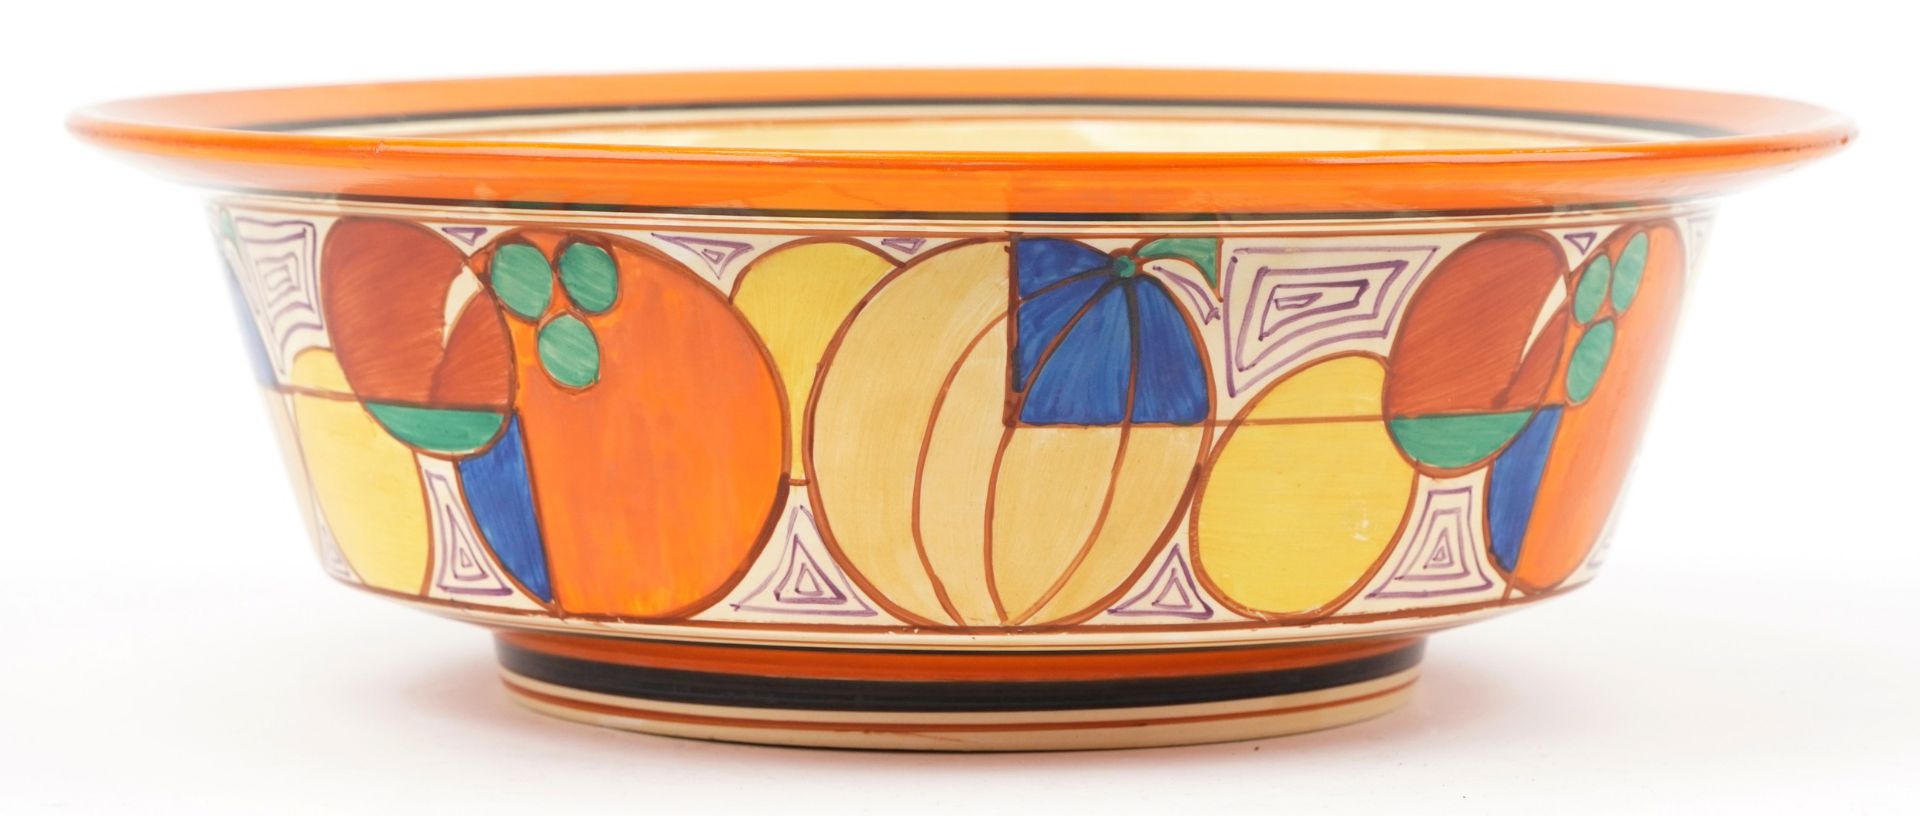 Clarice Cliff, large Art Deco Fantastique Bizarre Tolphin wash bowl hand painted in the melon